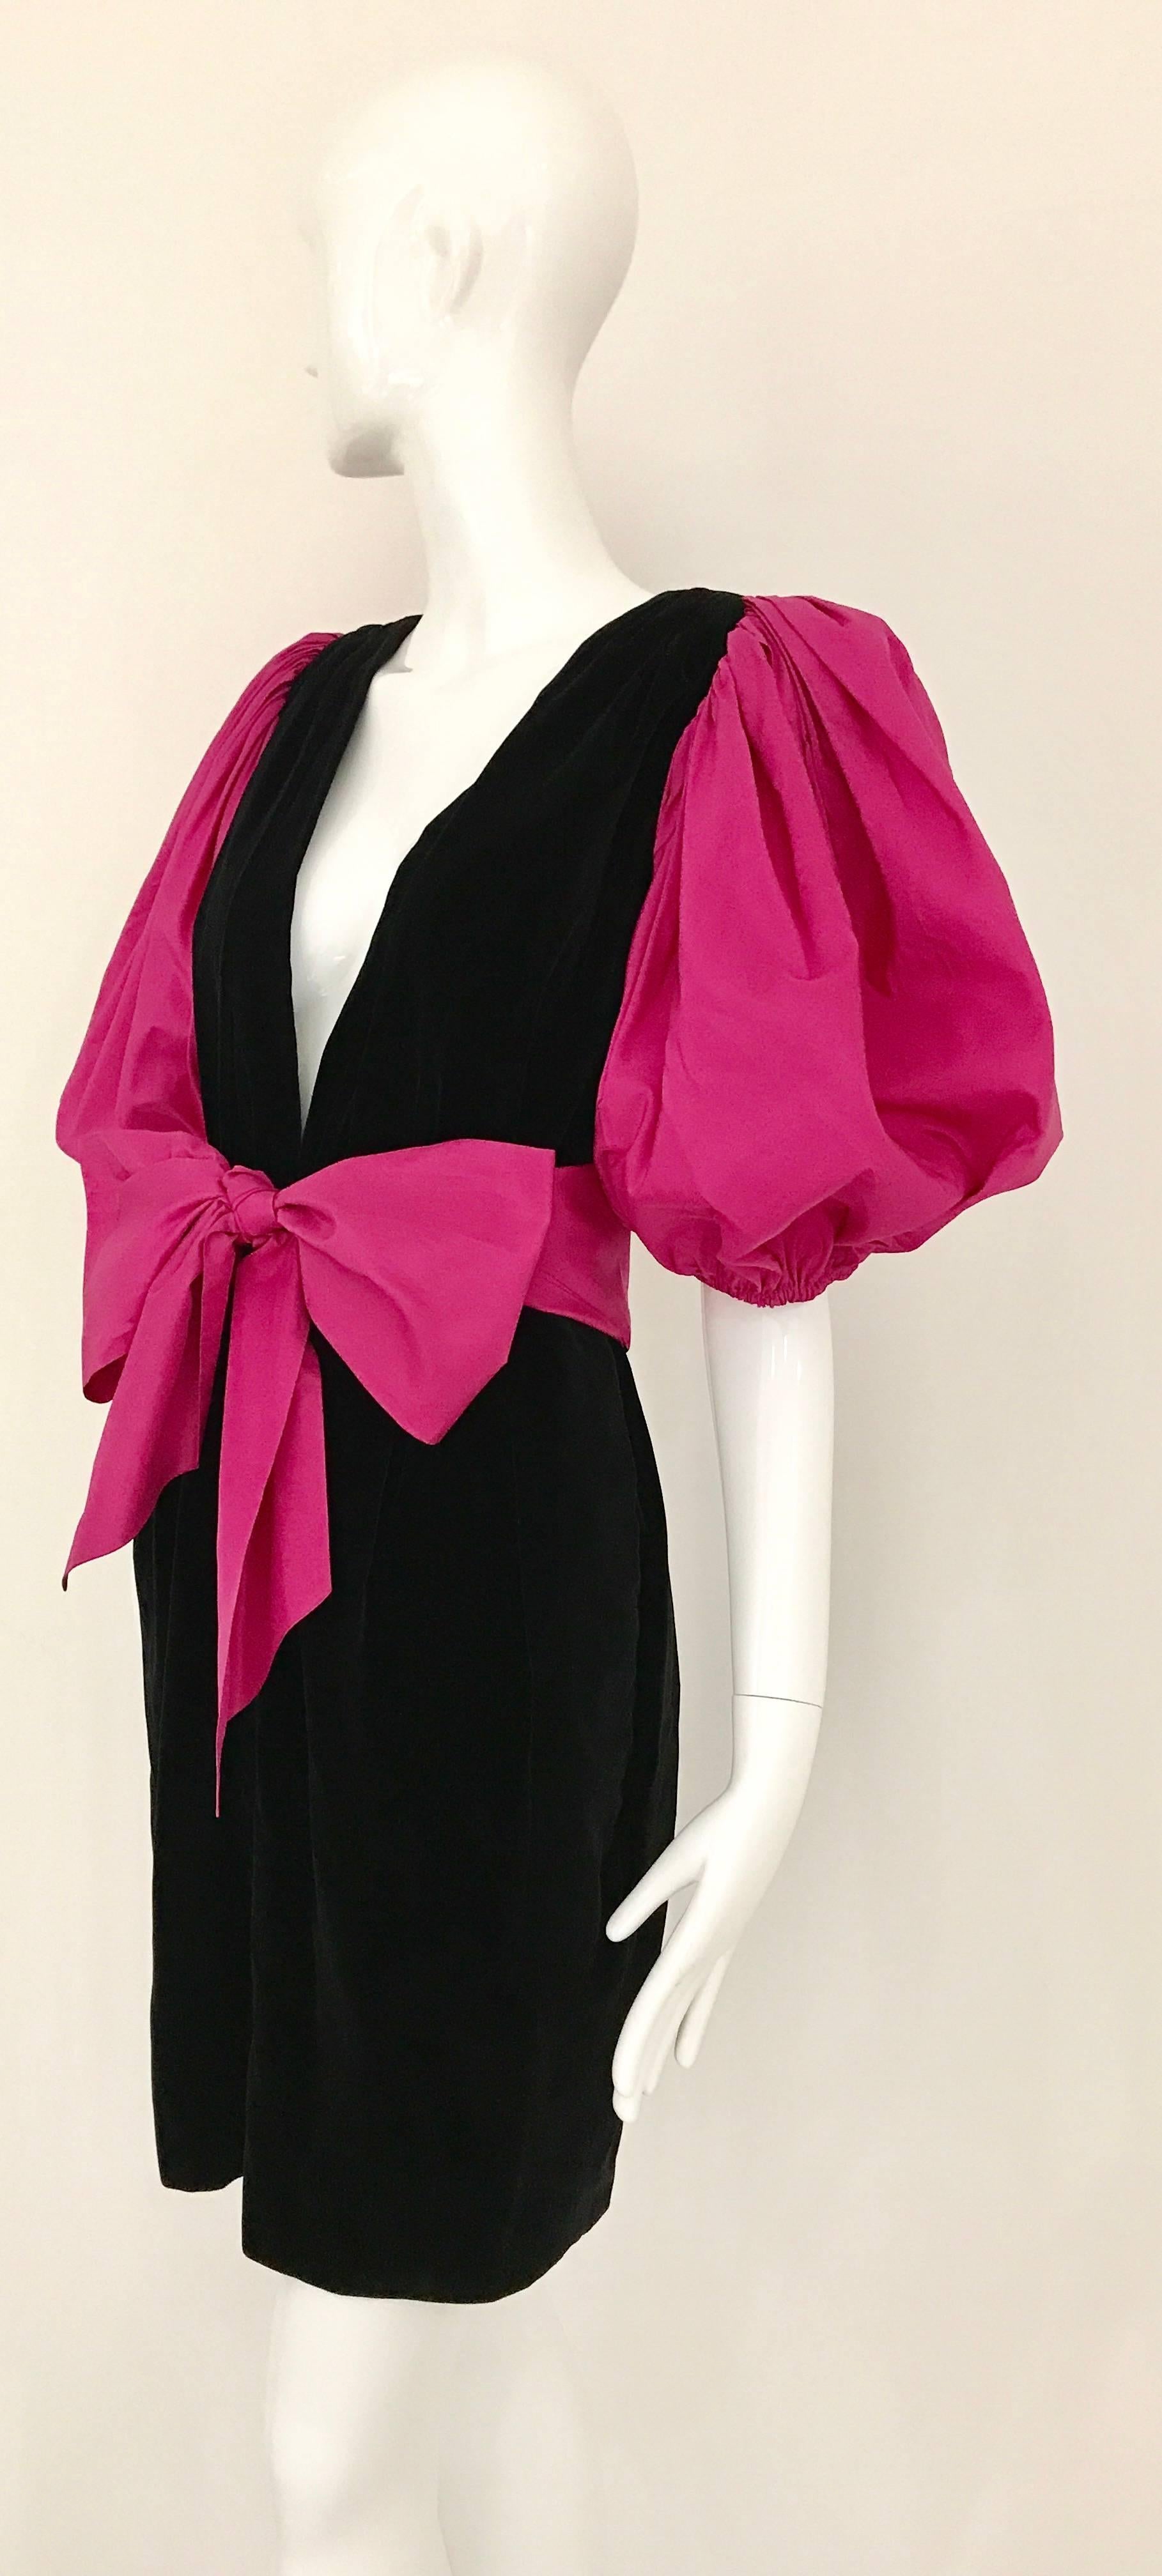 Vintage Yves Saint Laurent creation from 1980s! Black Velvet Dress with plunging neckline with beautiful Schiaparelli Pink puffy sleeves. Silk Ribbon sash and zipper on the side. Truly Collectors item. Size: Small or US 4
Bust: 34 inch - 36 inch /